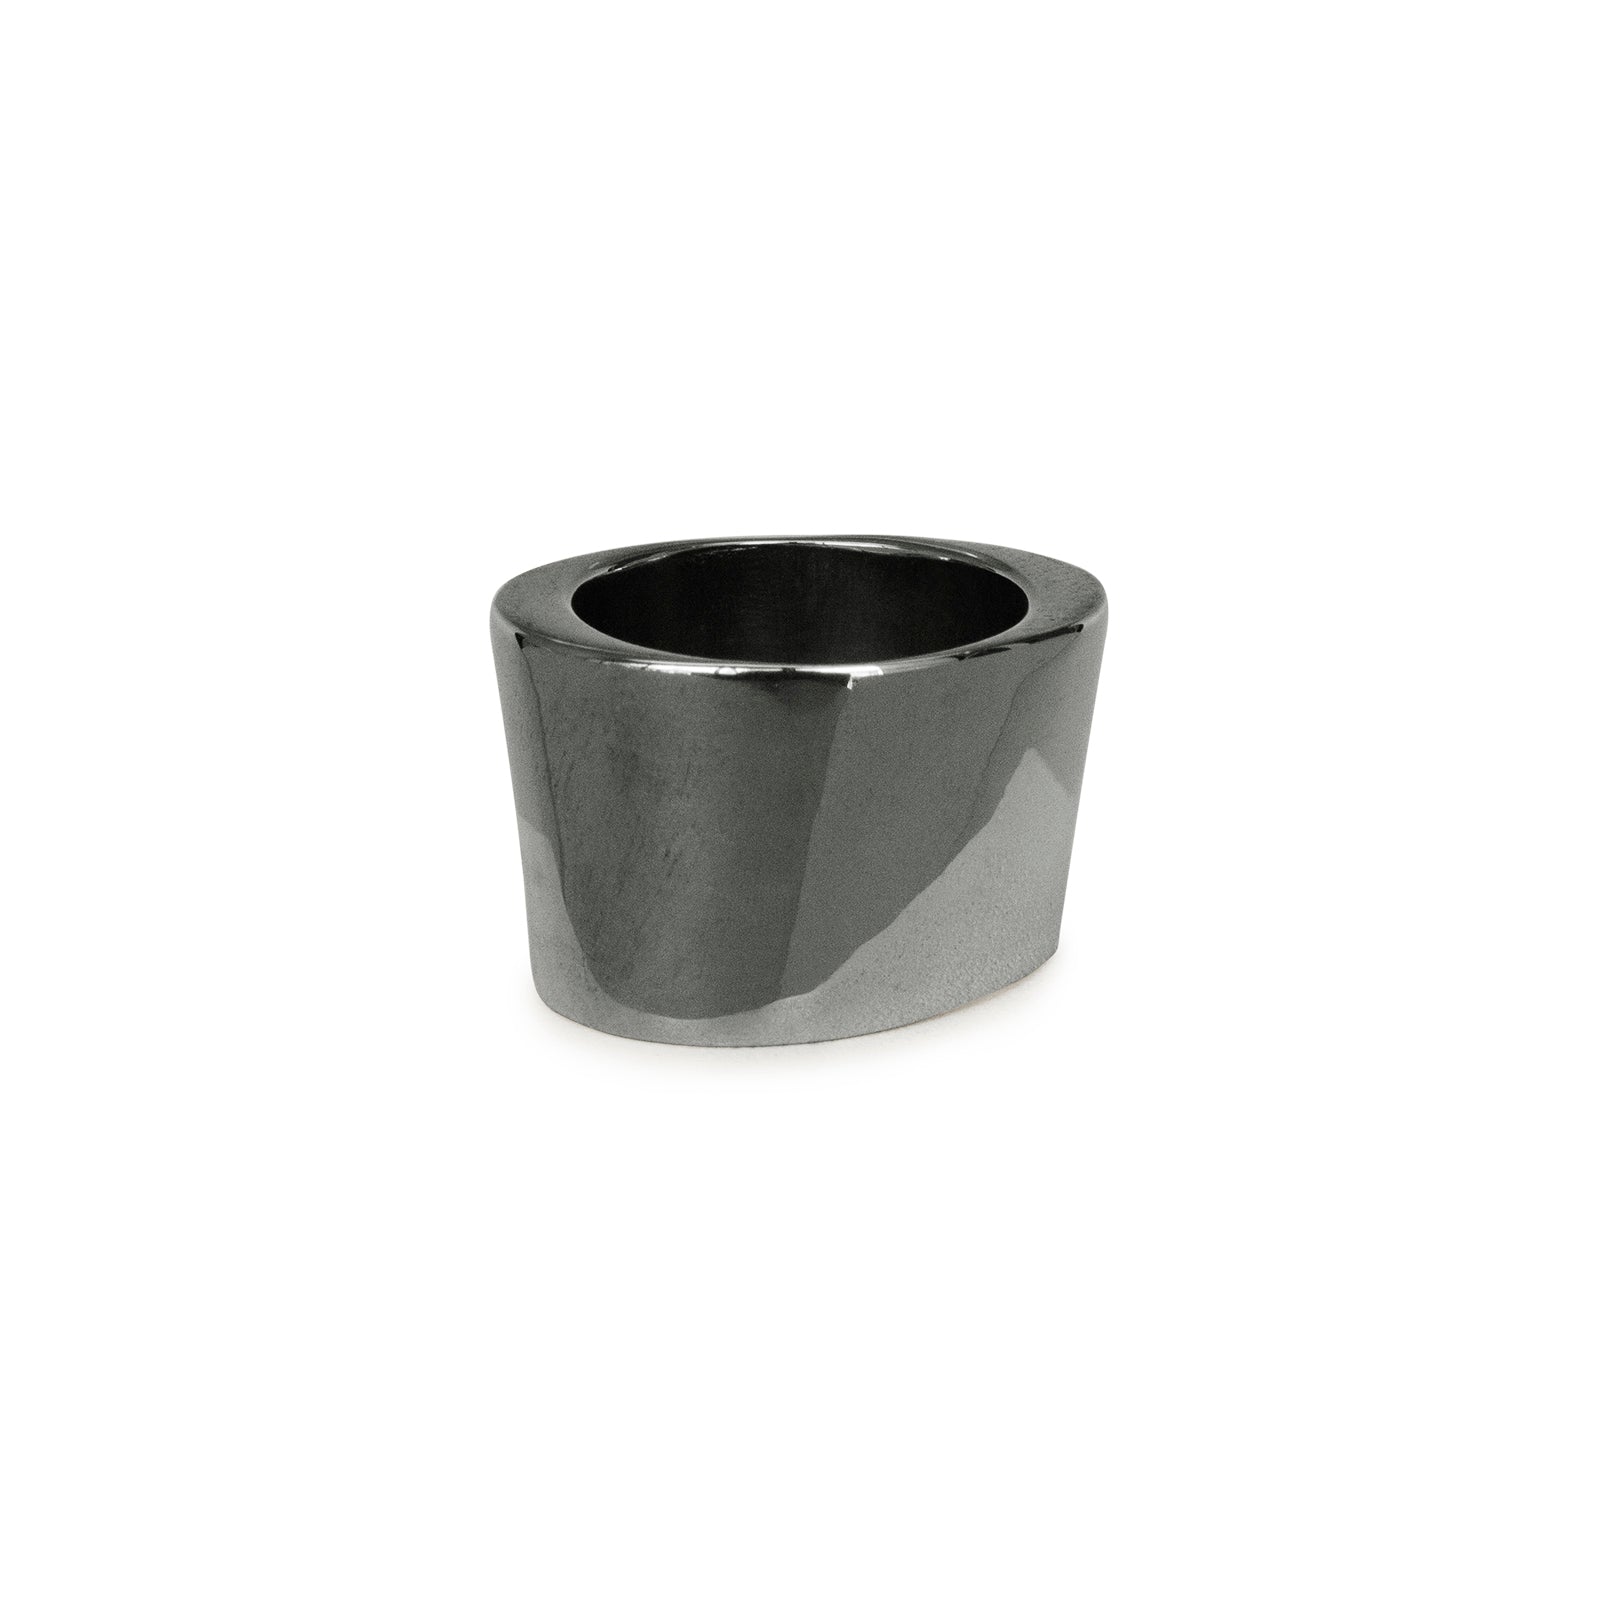 sterling silver plated in black rhodium / 6 torque cigar band